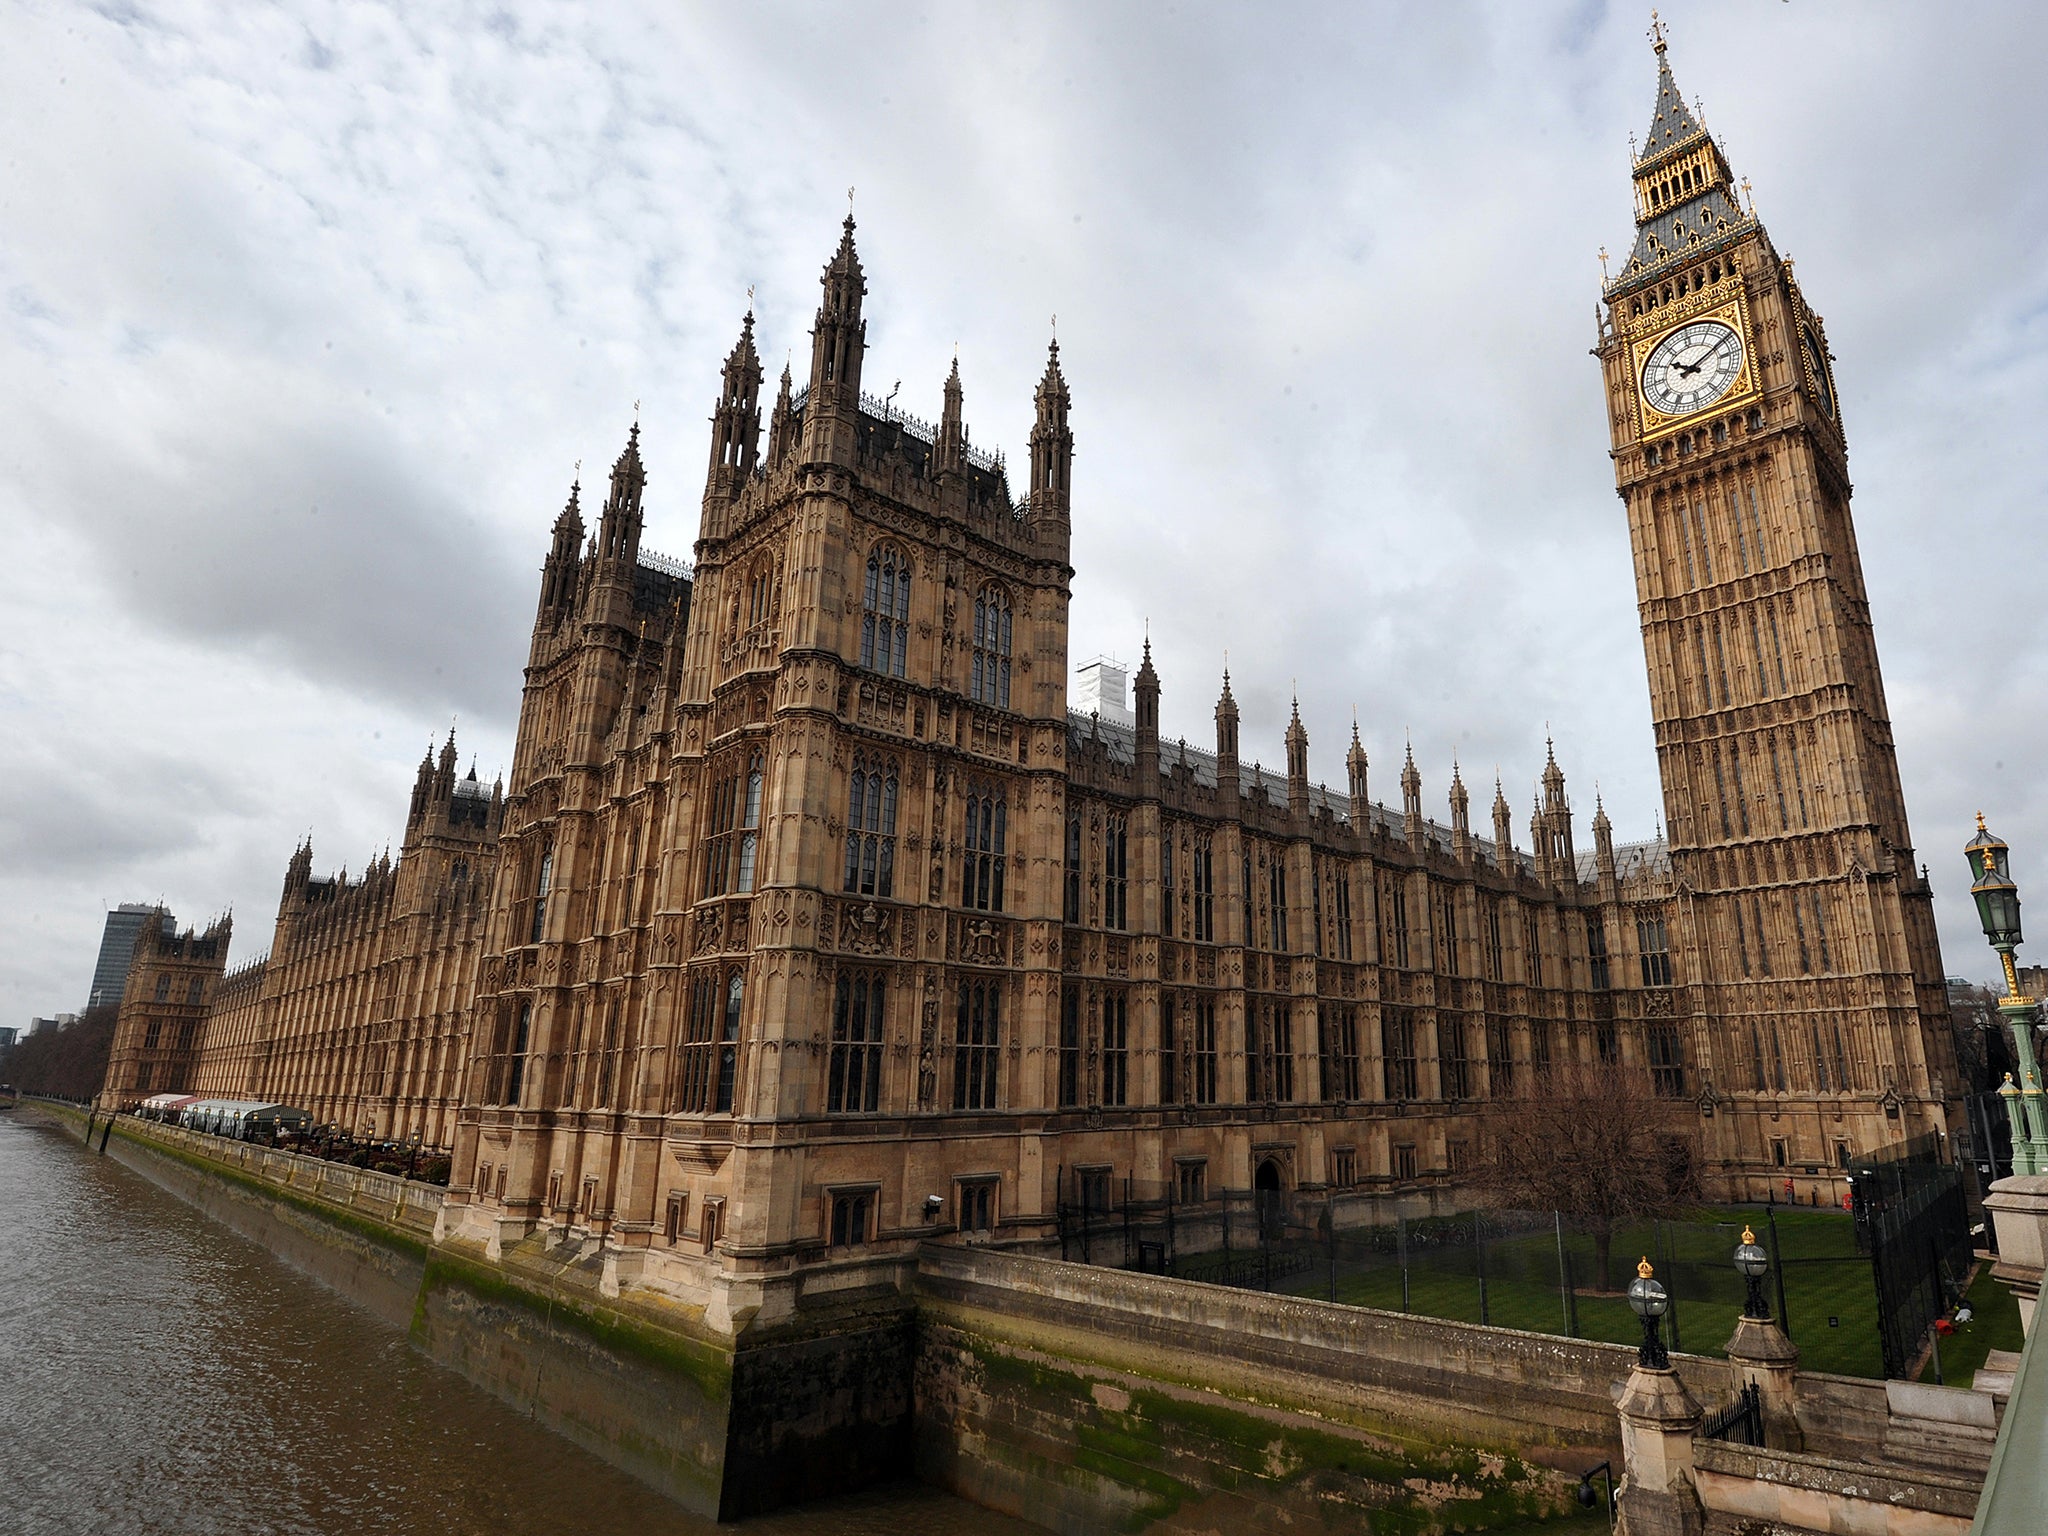 The attack is alleged to have taken place in the Houses of Parliament